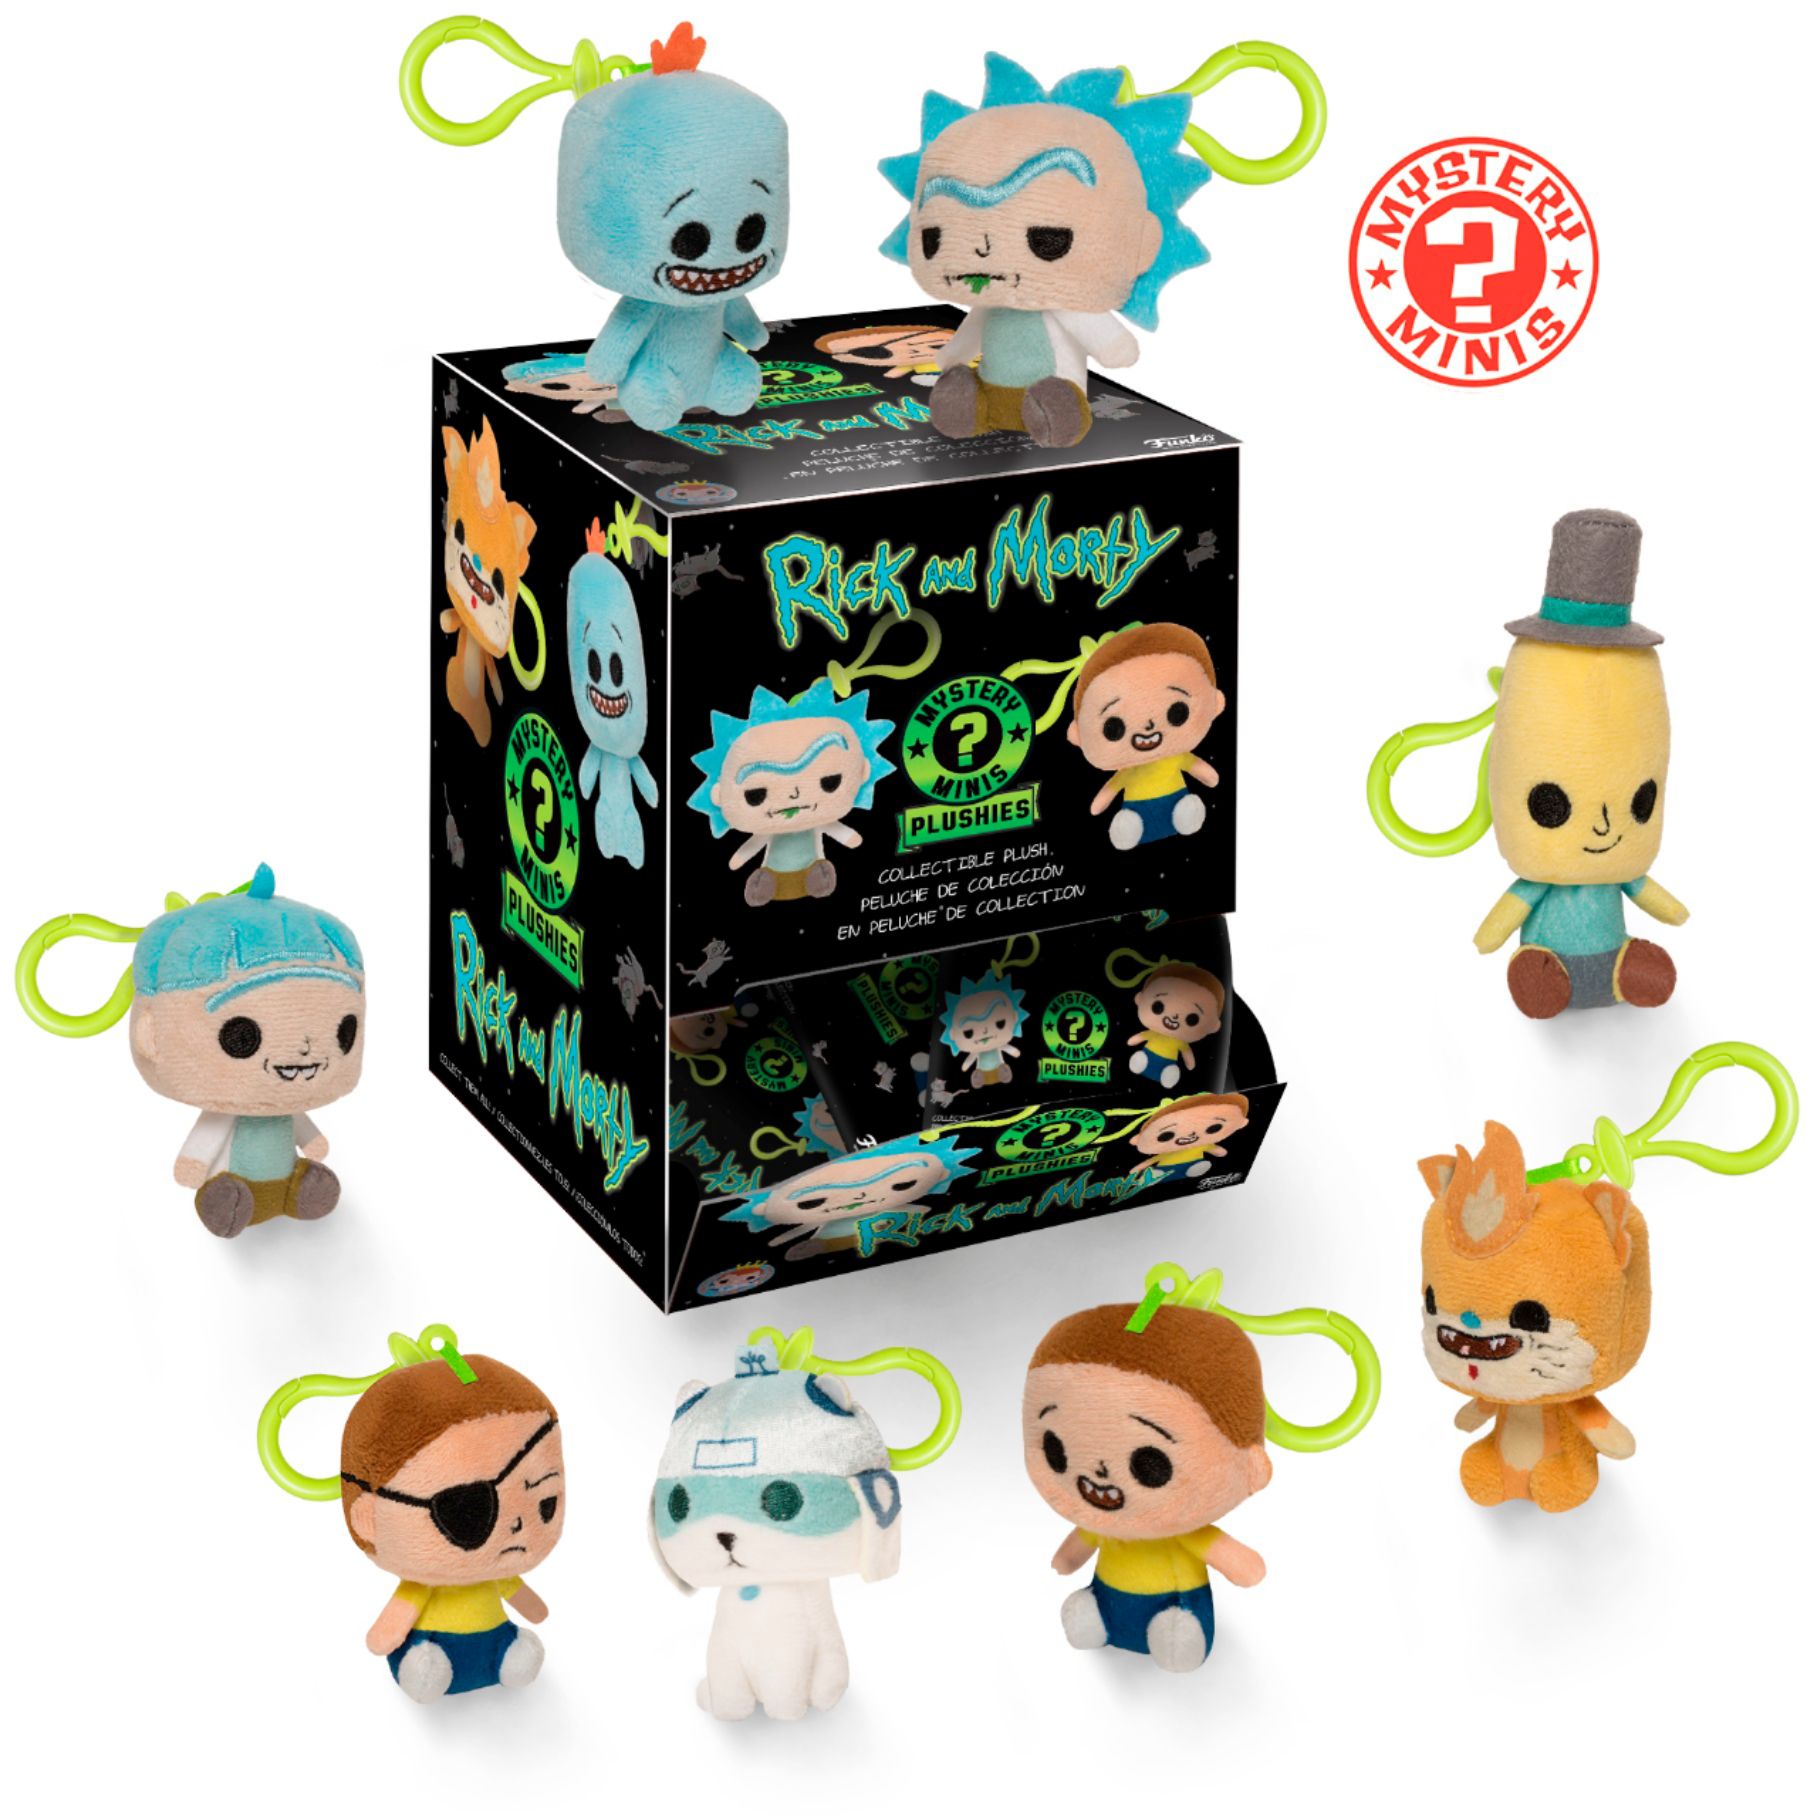 RICK AND MORTY FUNKO MYSTERY MINIS COLLECTIBLE PLUSH SQUANCHIE 